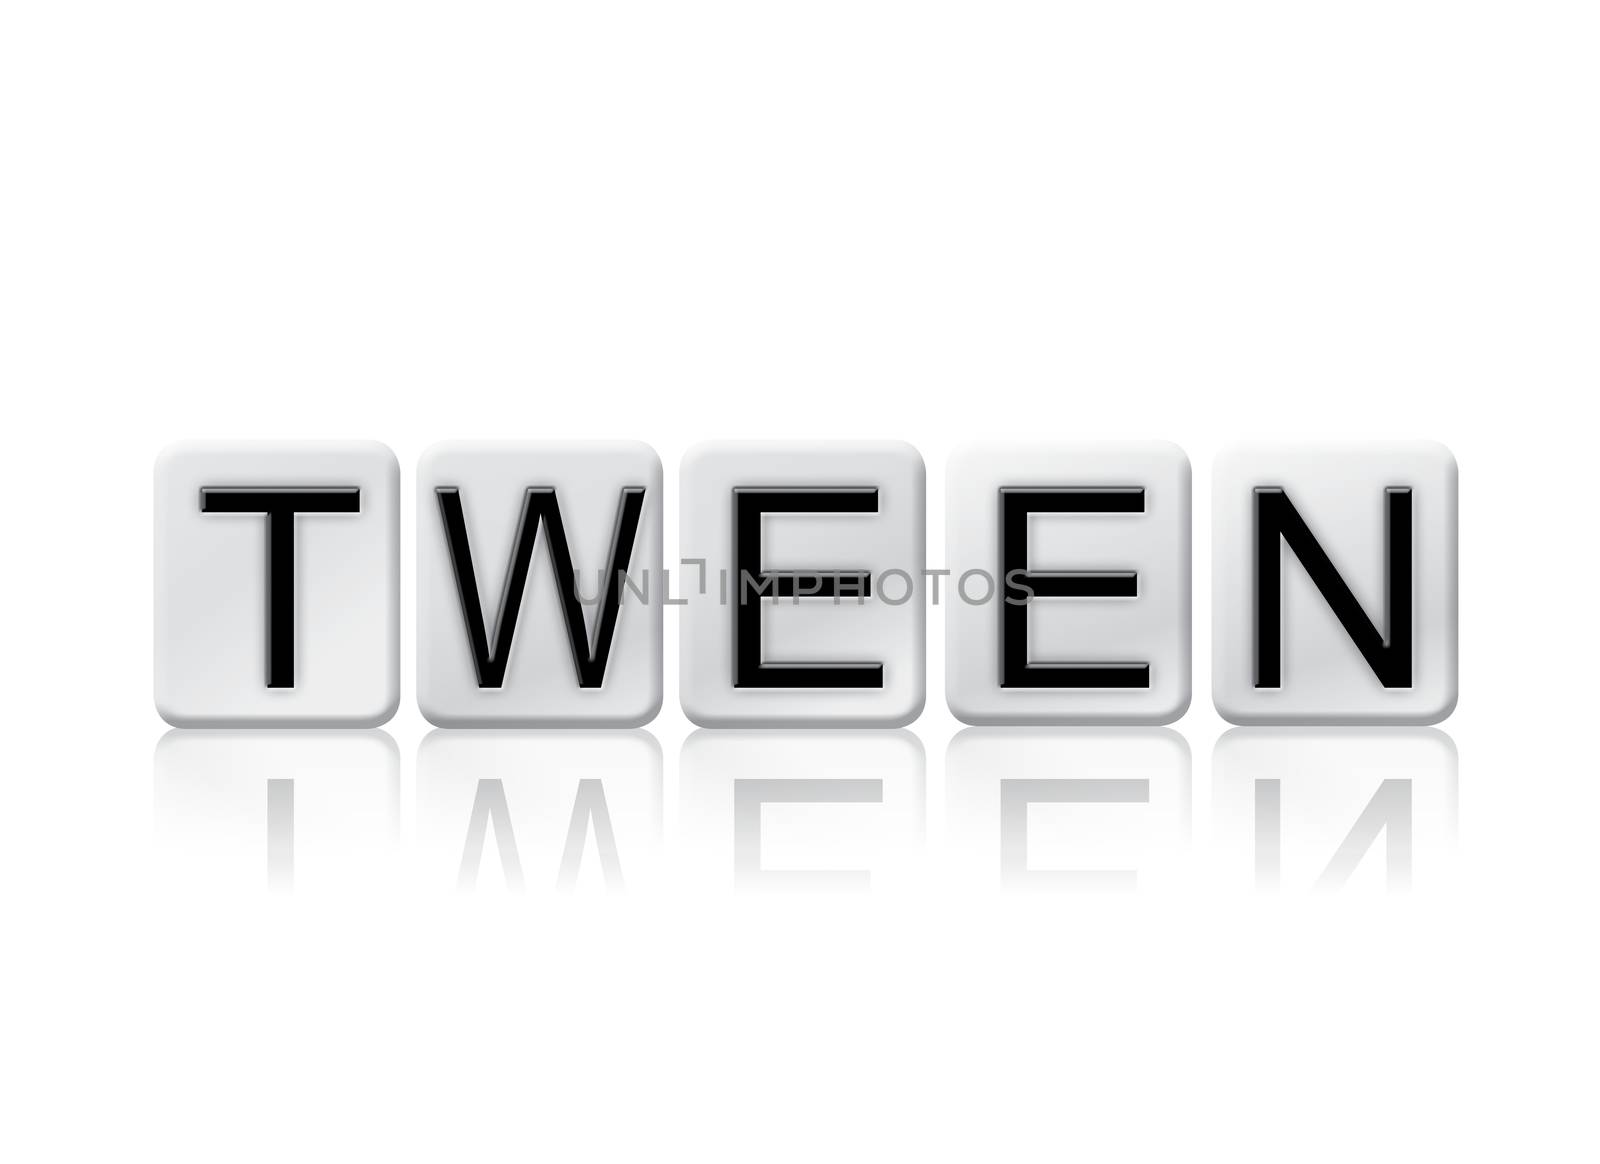 The word "Tween" written in tile letters isolated on a white background.